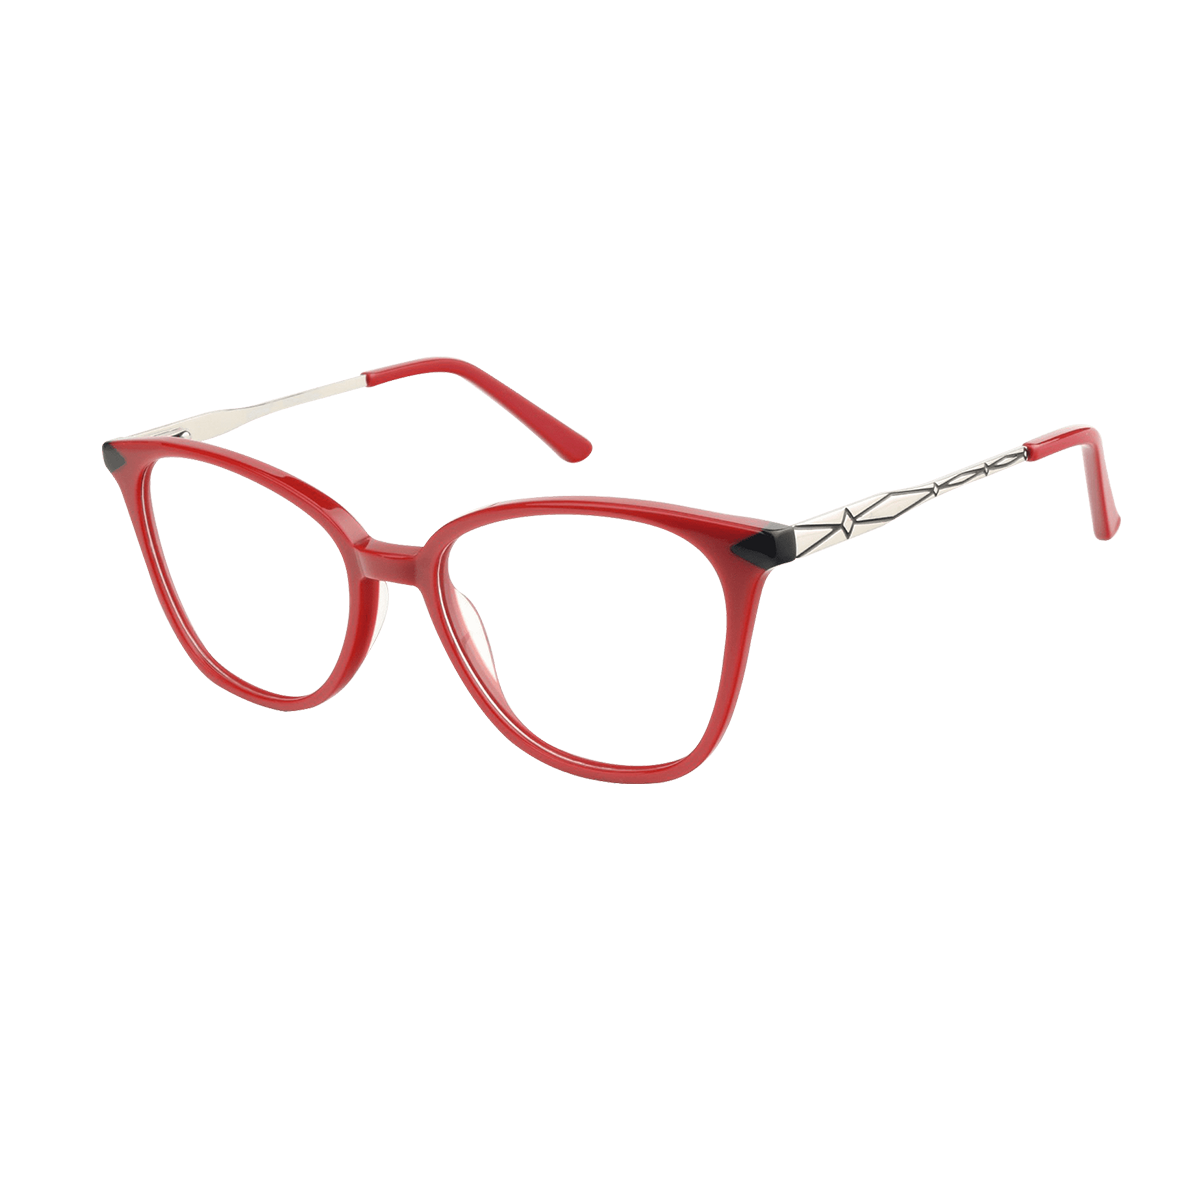 Asteria - Square Red Reading Glasses for Women